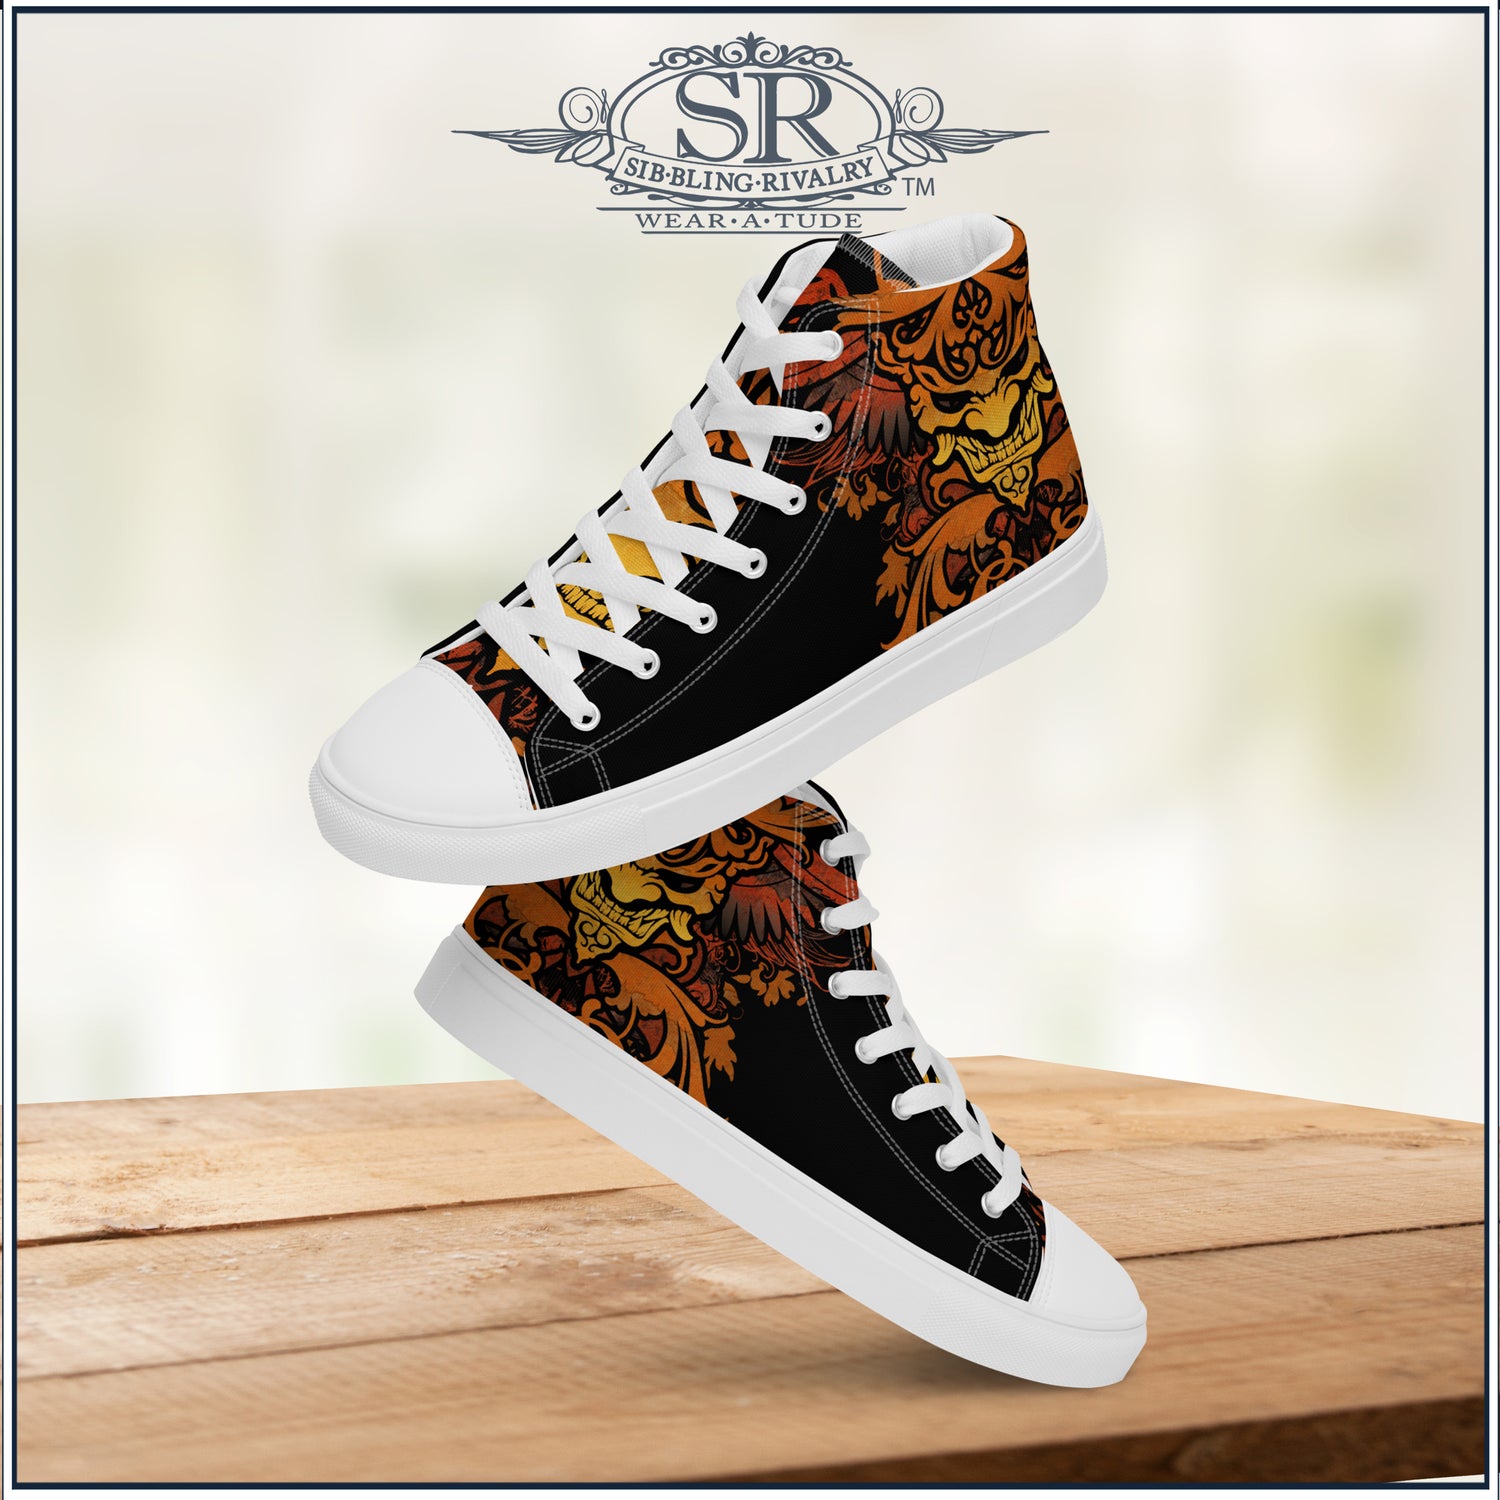 Crossroads demon high tops for the blues player by SR Wear Atude, Sib.Bling Rivalry Design. A product by The Joubert Sisters